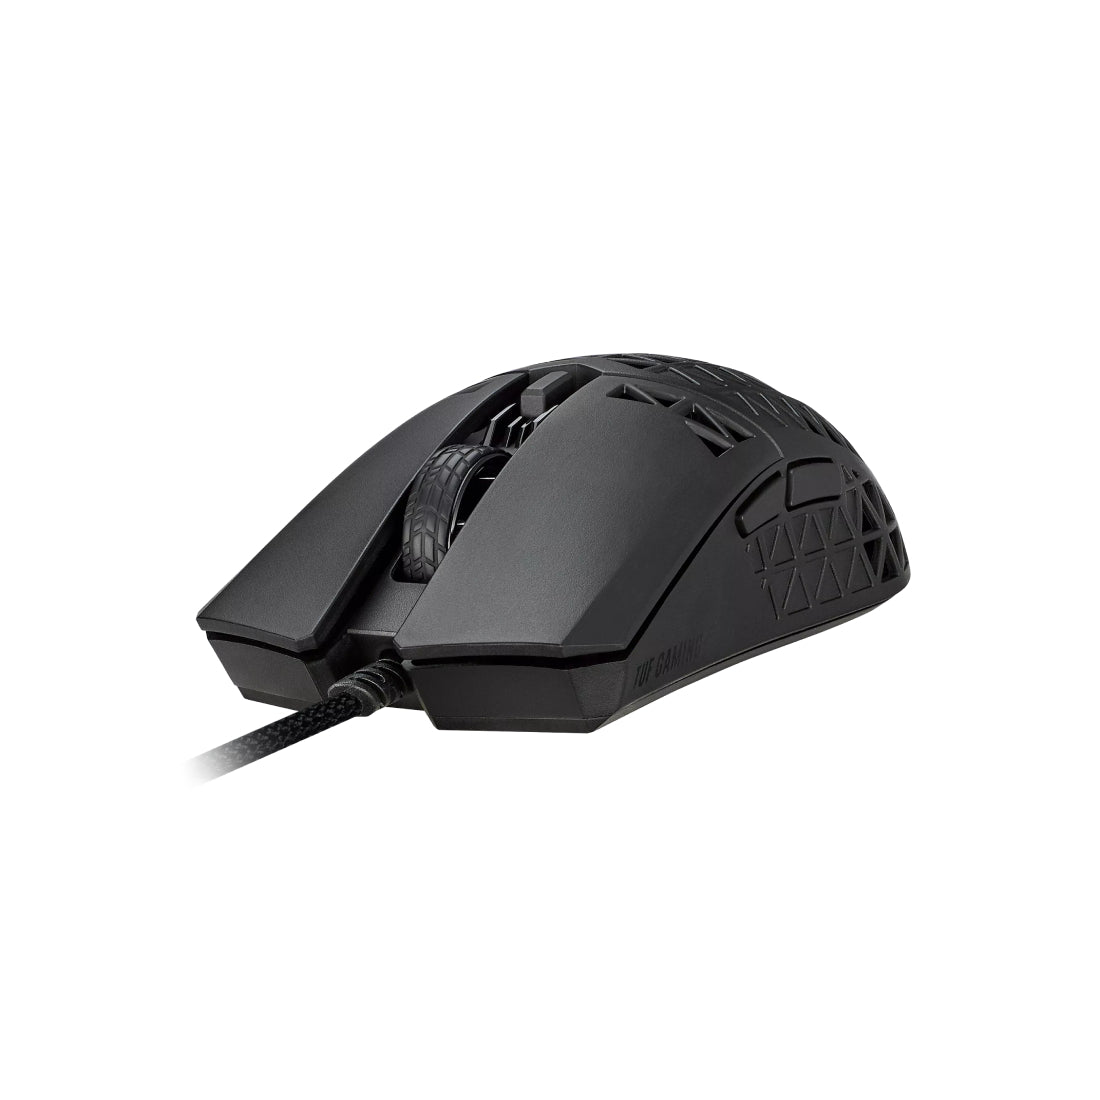 Asus TUF Gaming M4 Air Lightweight Wired Gaming Mouse - Black - Store 974 | ستور ٩٧٤